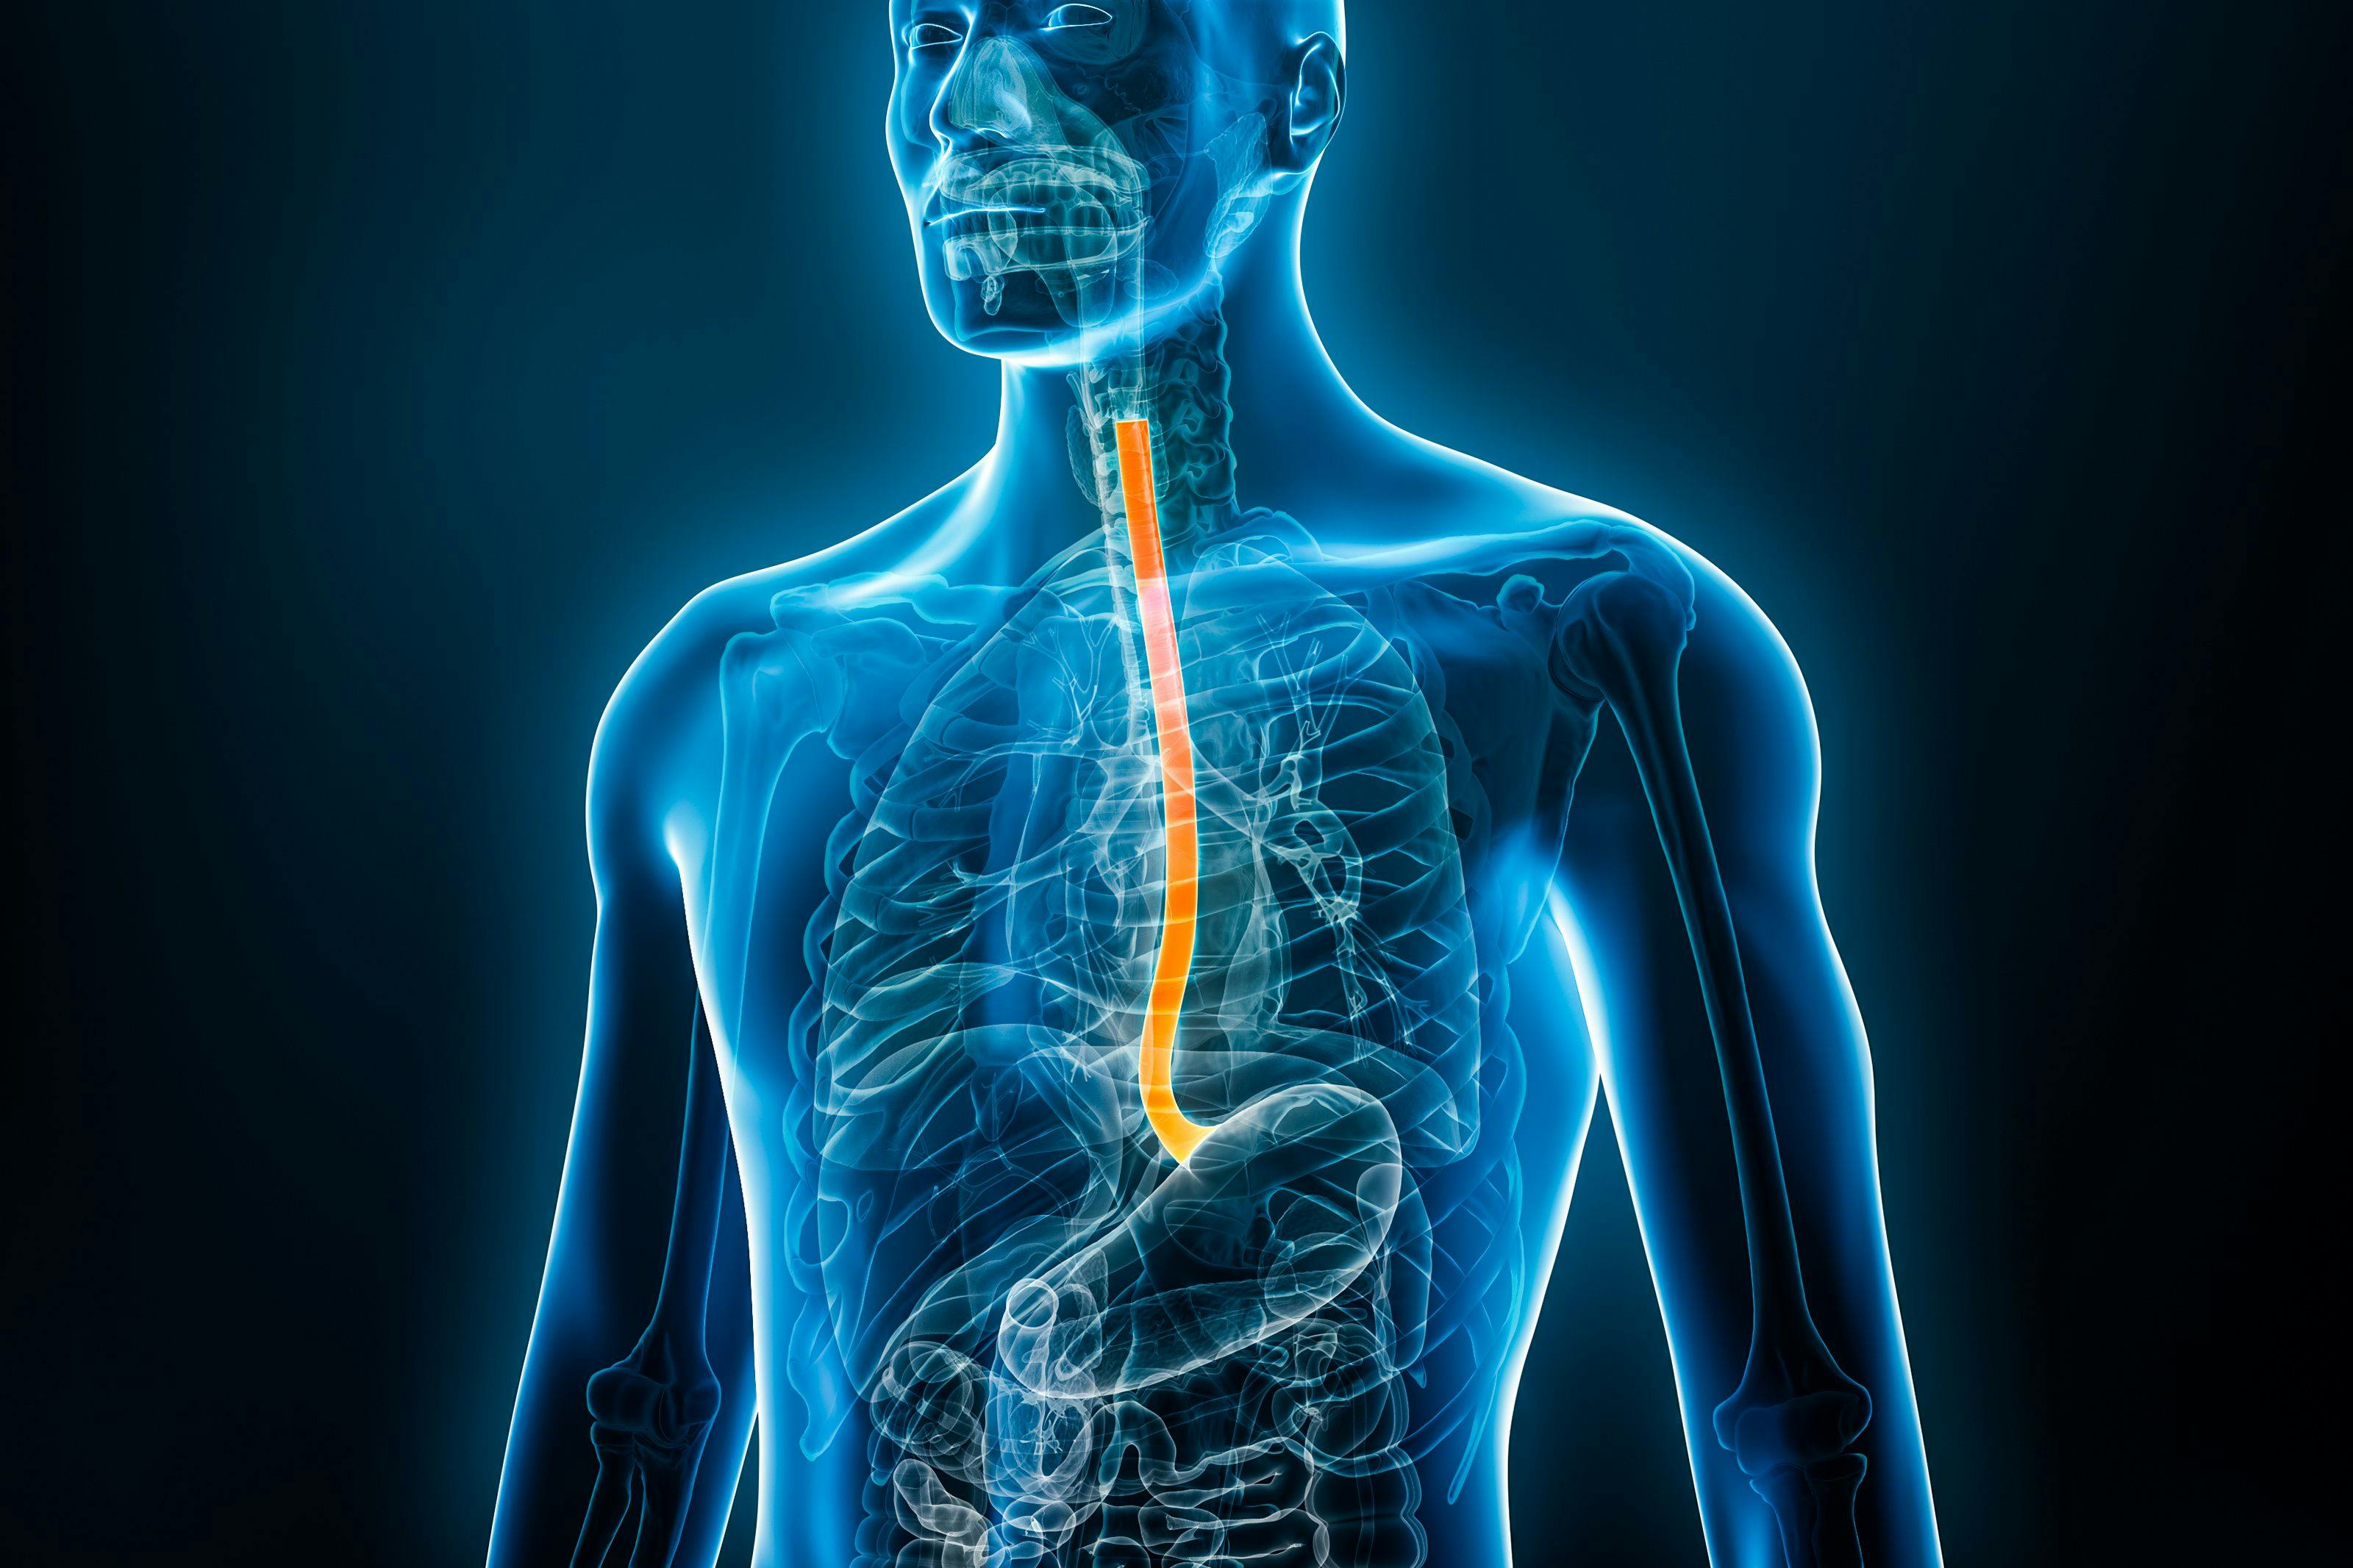 Image credit: Matthieu | stock.adobe.com. Xray front view of the esophagus or oesophagus 3D rendering illustration with male body. Human organ anatomy, esophagitis, digestive system, medical, biology, science, medicine, healthcare concepts.